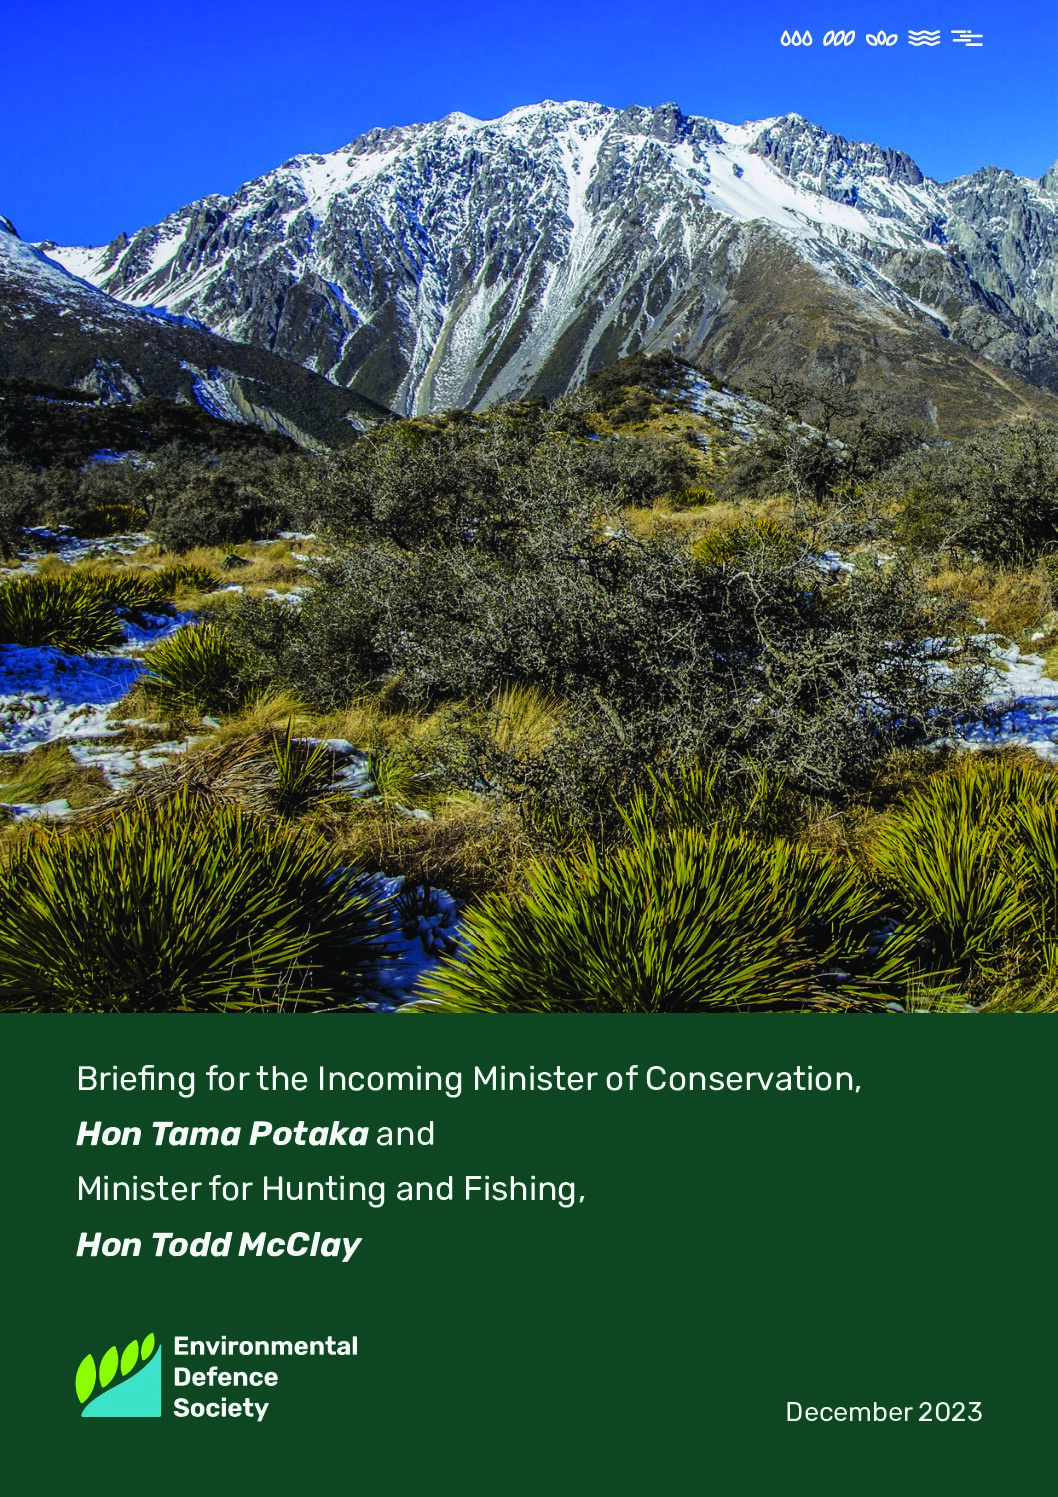 Briefing for the Incoming Minister of Conservation and Minister for Hunting and Fishing